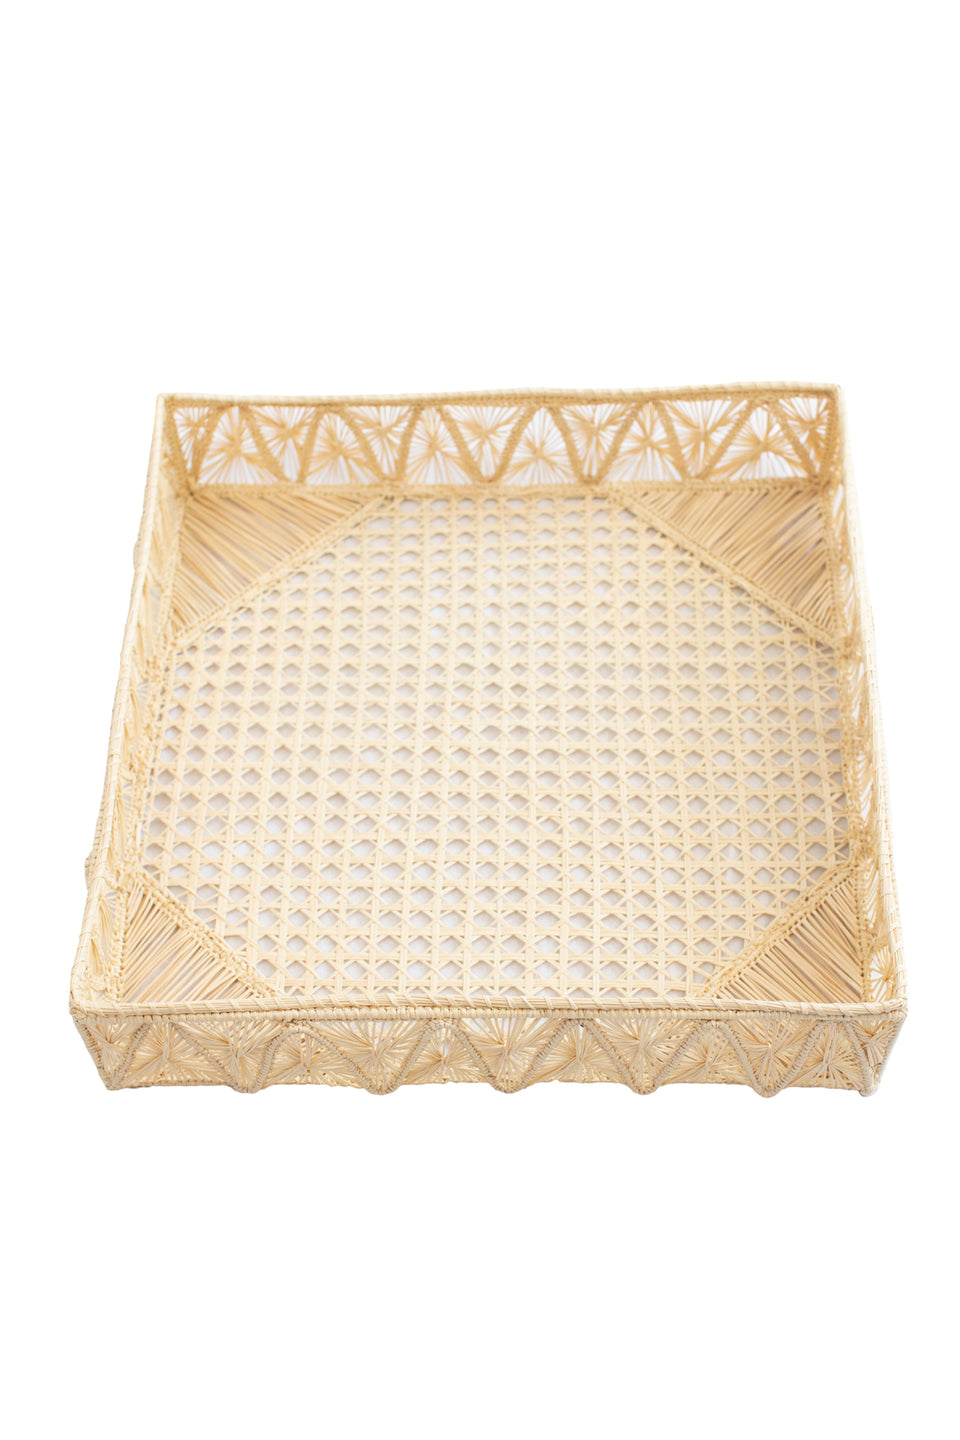 Large Square Woven Tray